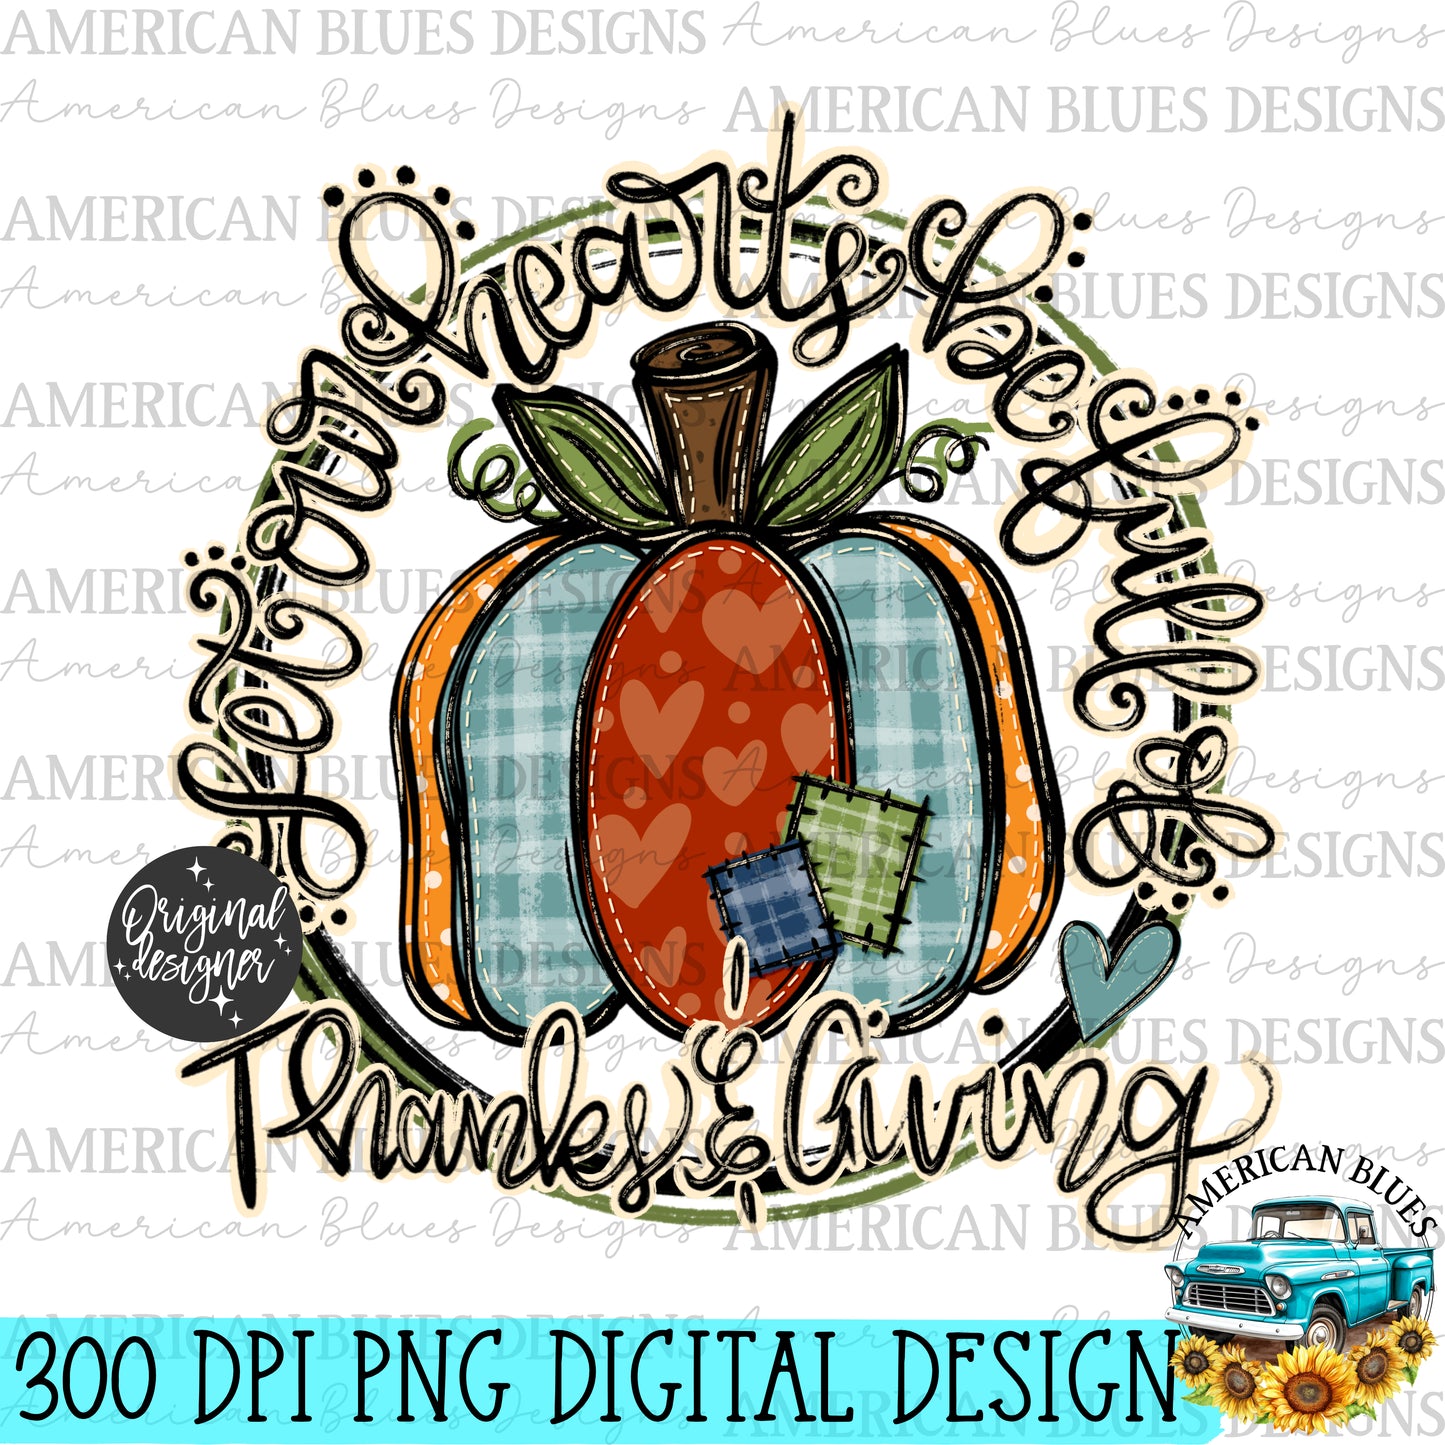 Let our hearts be full of Thanks & Giving digital design |American Blues Designs